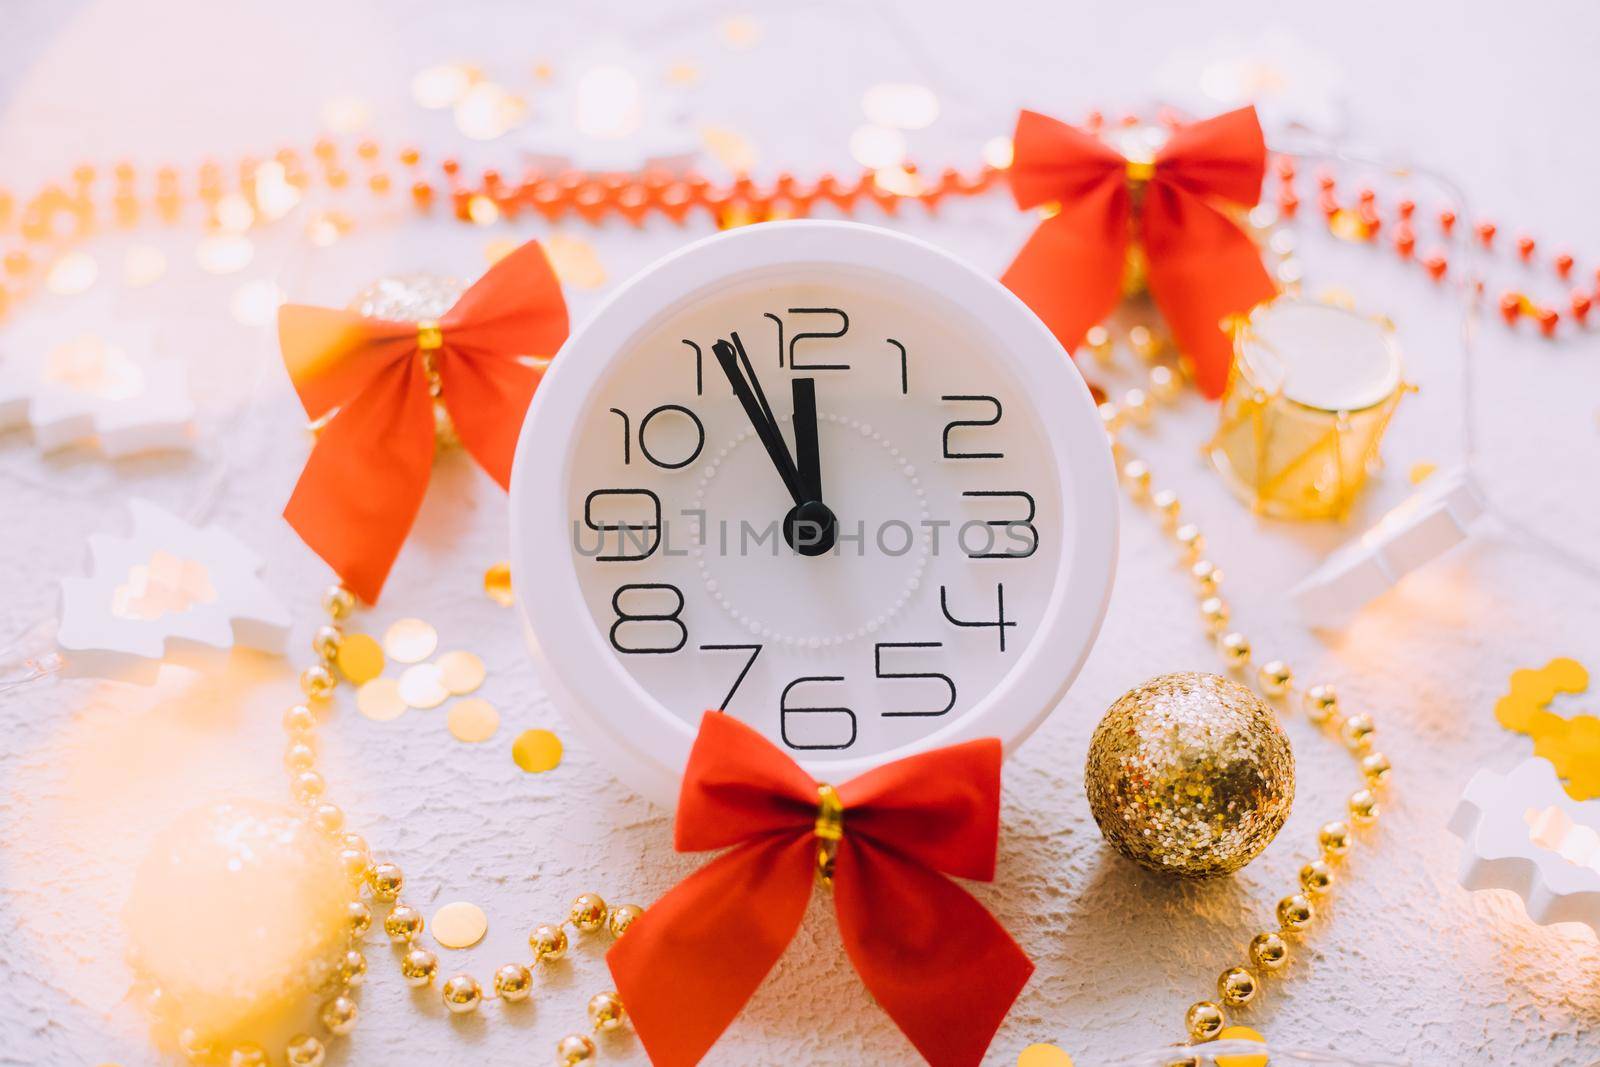 A clock in a New Year's layout on a white background. New Year's gifts. An article about the New Year and Christmas. It's almost 12 o'clock